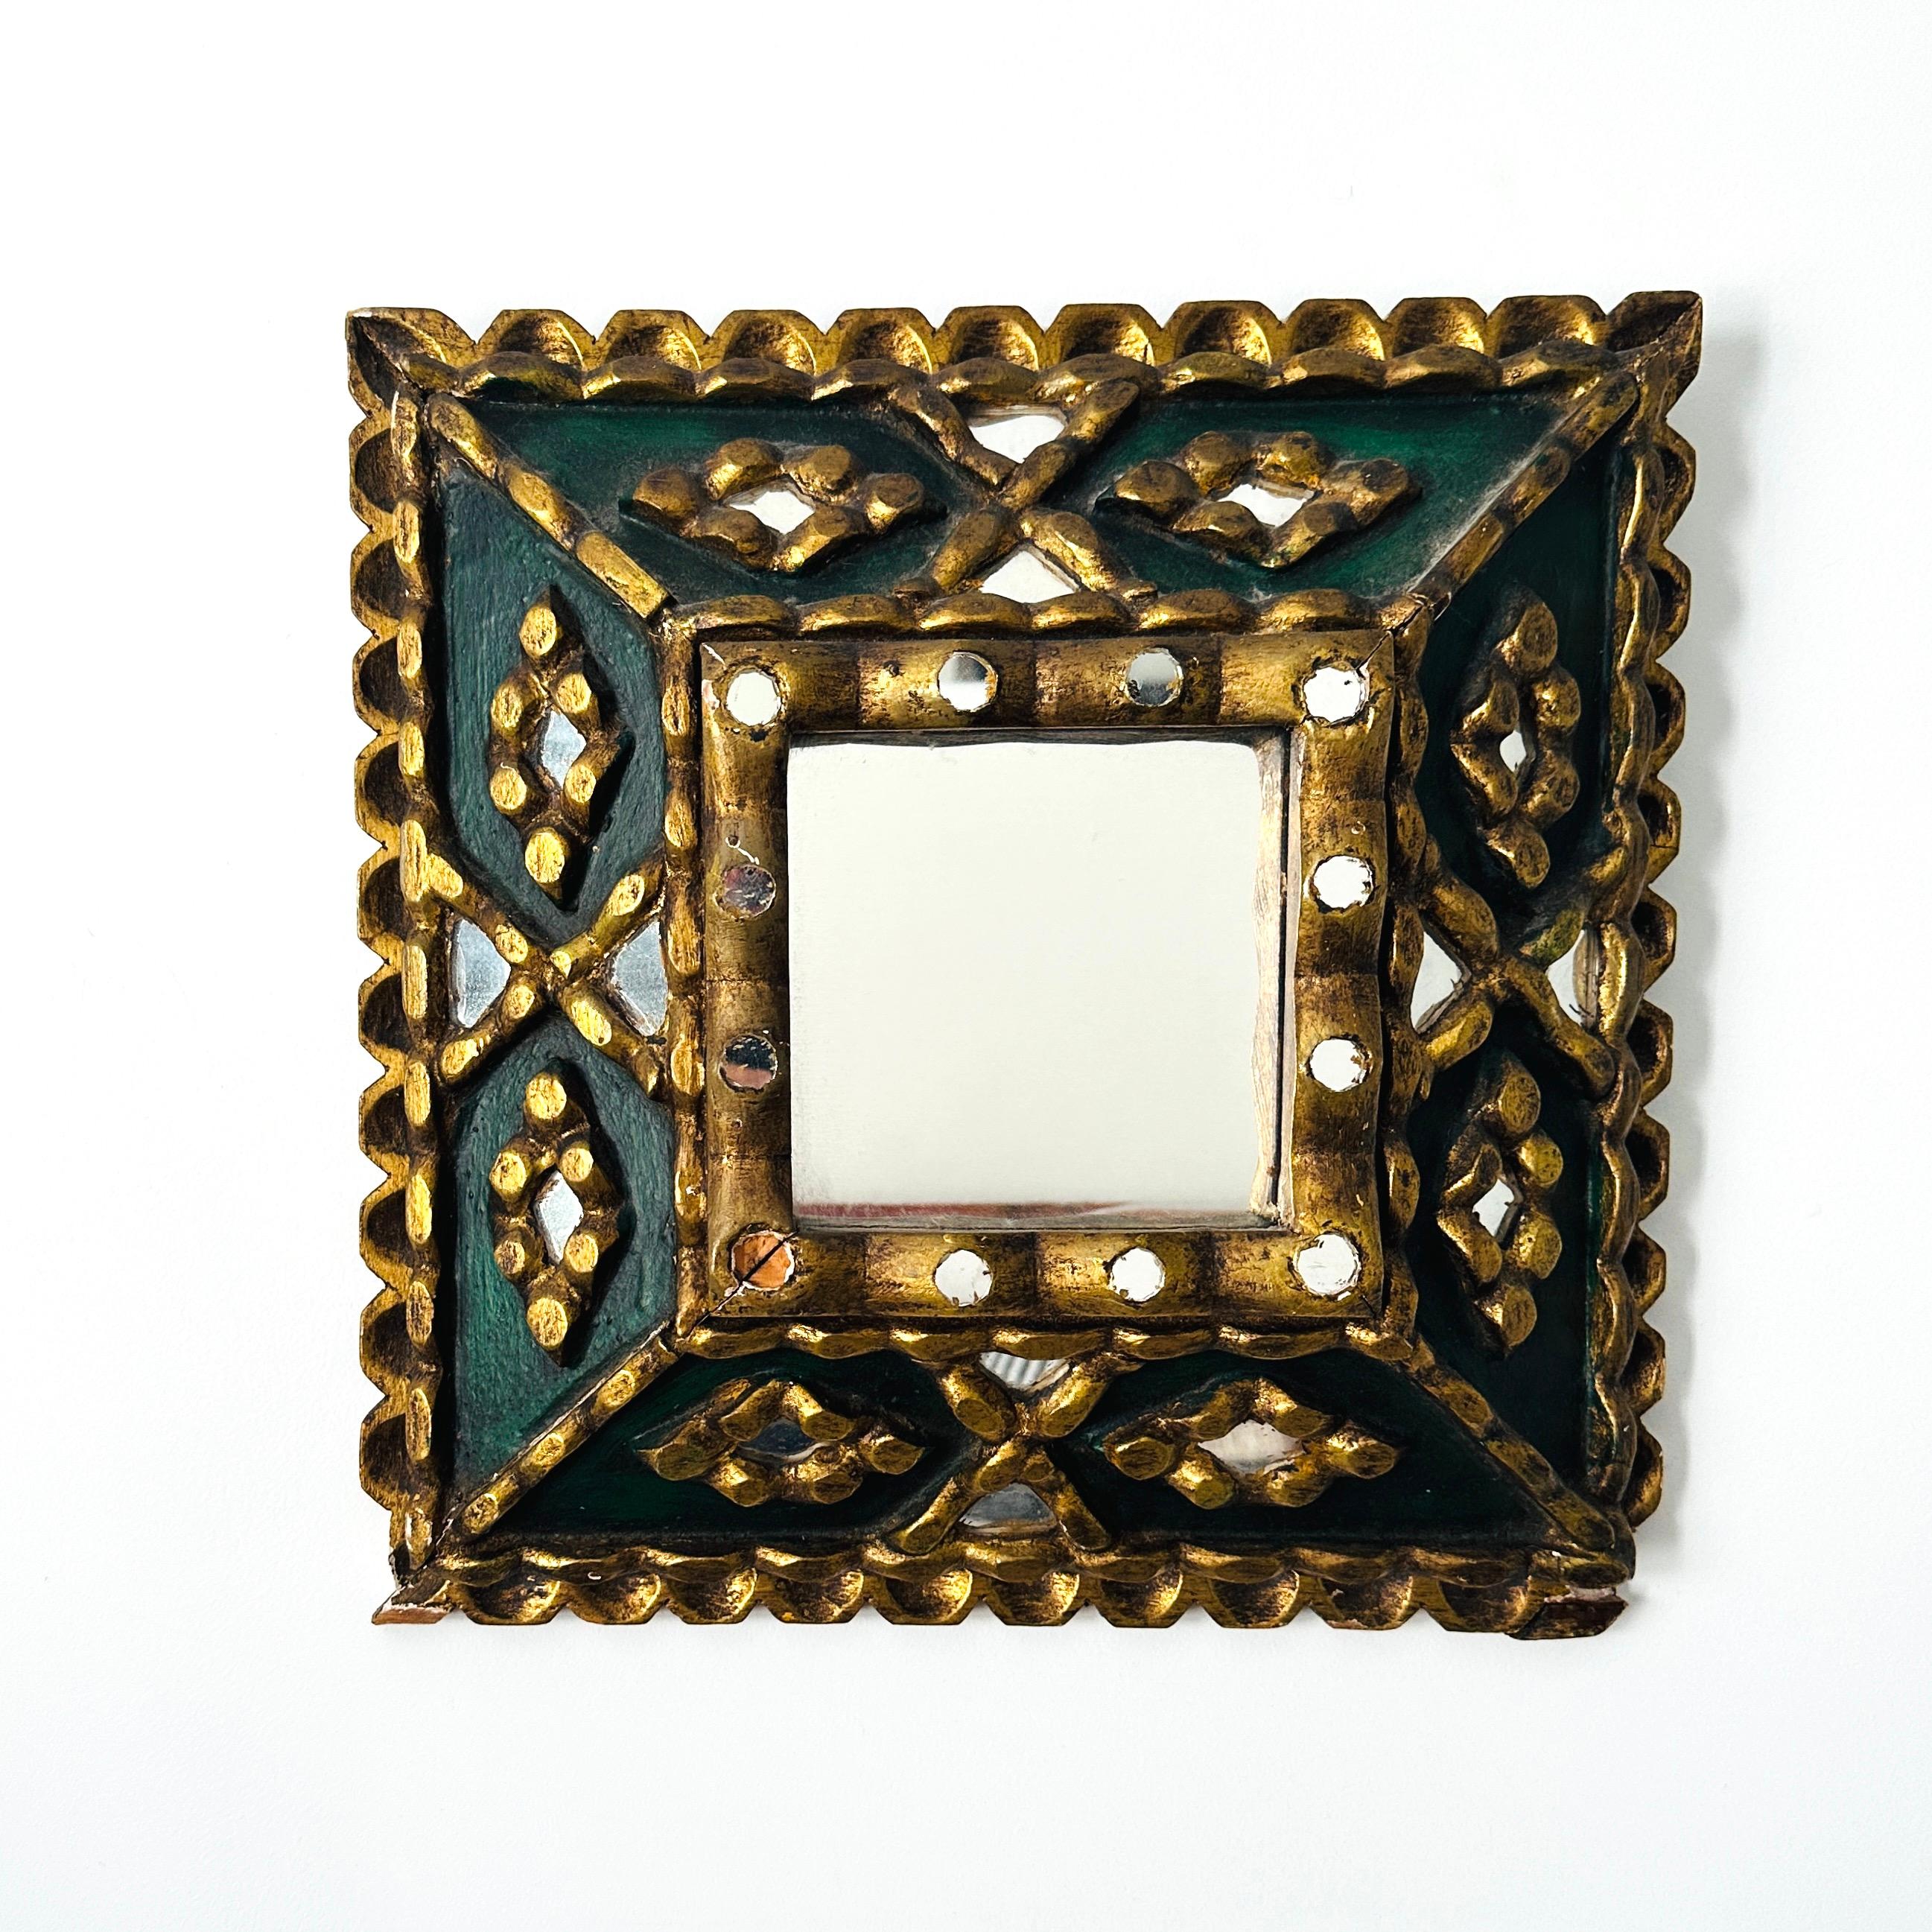 Antique Spanish Colonial mirror features a handmade shadowbox frame with ornate hand carvings  in gilt wood.  This unique frame also features a series of mosaic mirrored insets and a hand-painted center in dark green.  Missing one mirror inset and